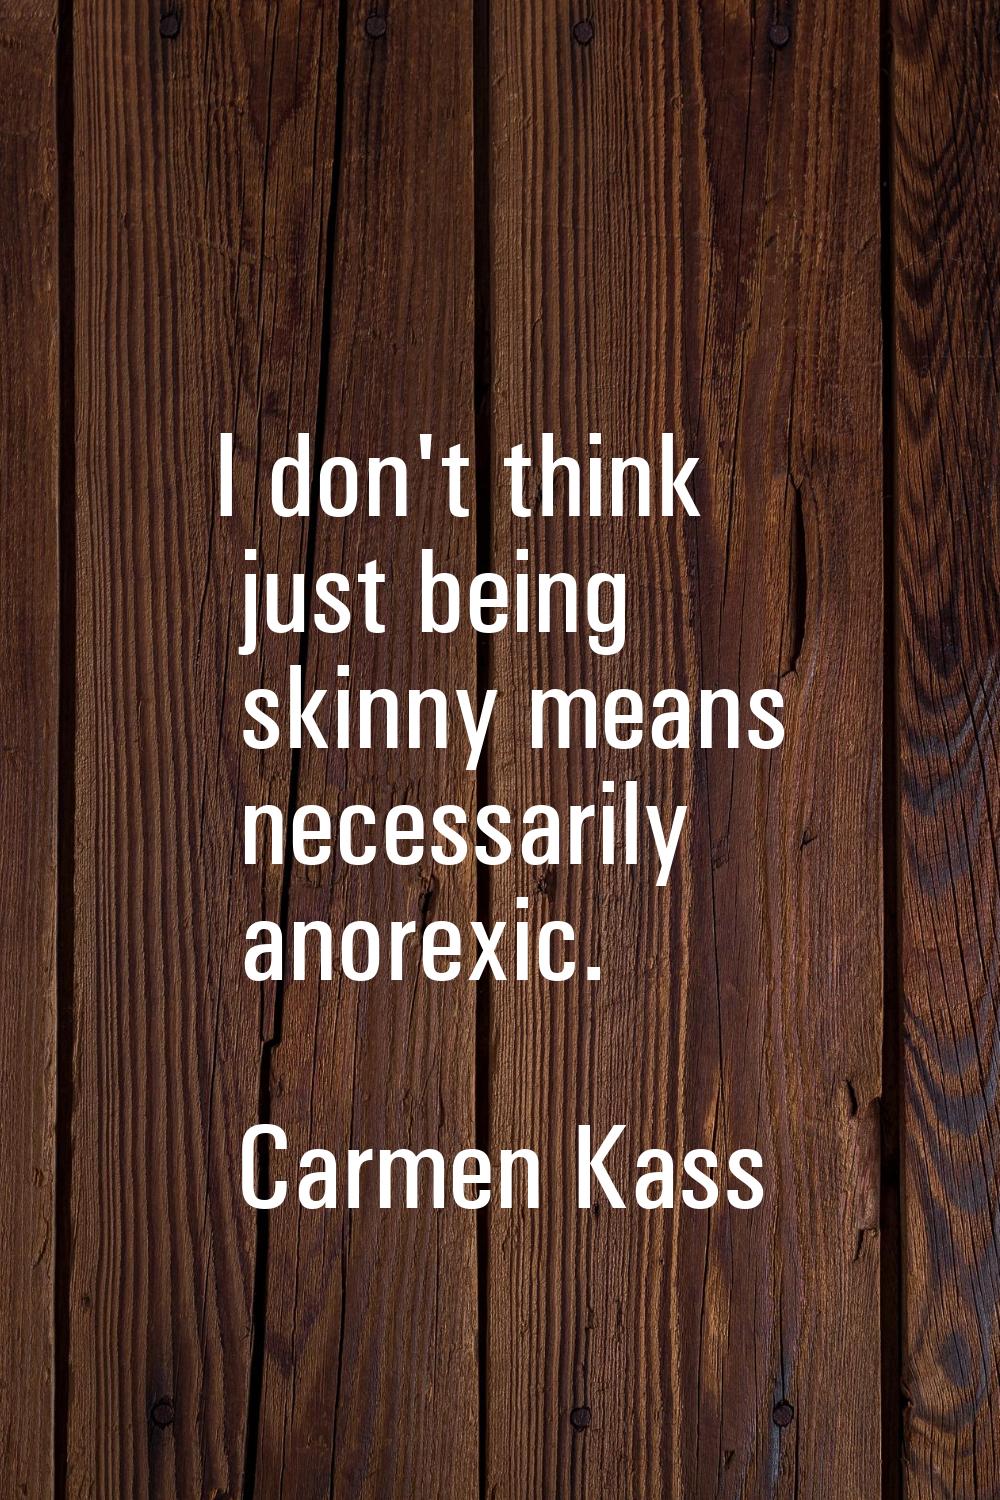 I don't think just being skinny means necessarily anorexic.